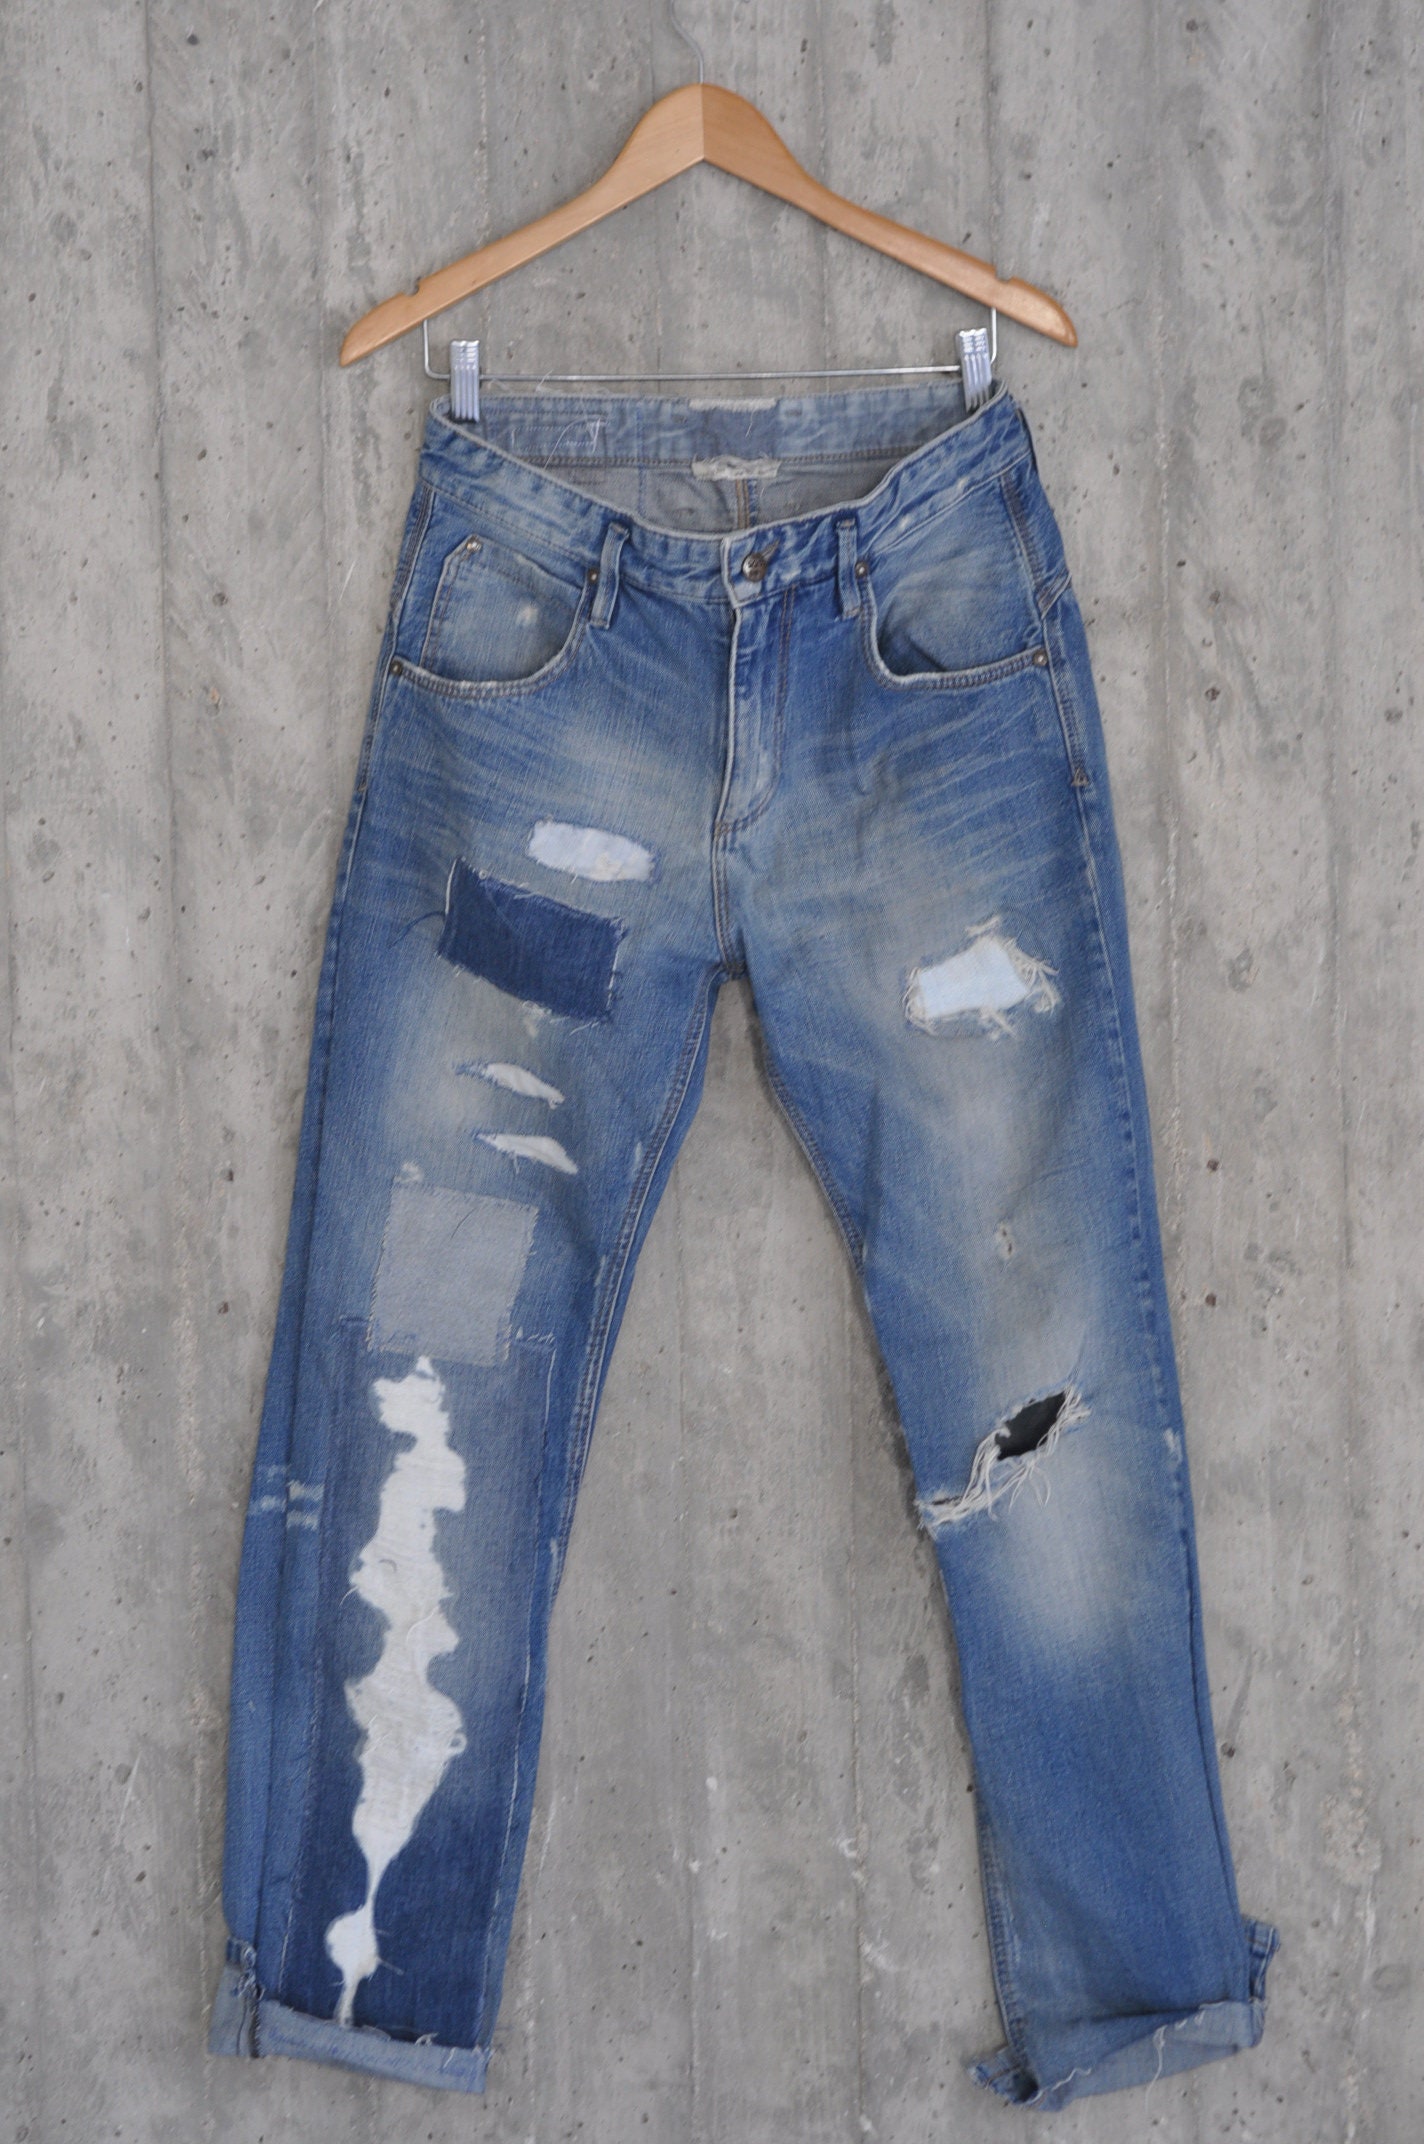 Vintage Levis 501 Jeans Ripped Distressed Levis Jeans With - Etsy Singapore